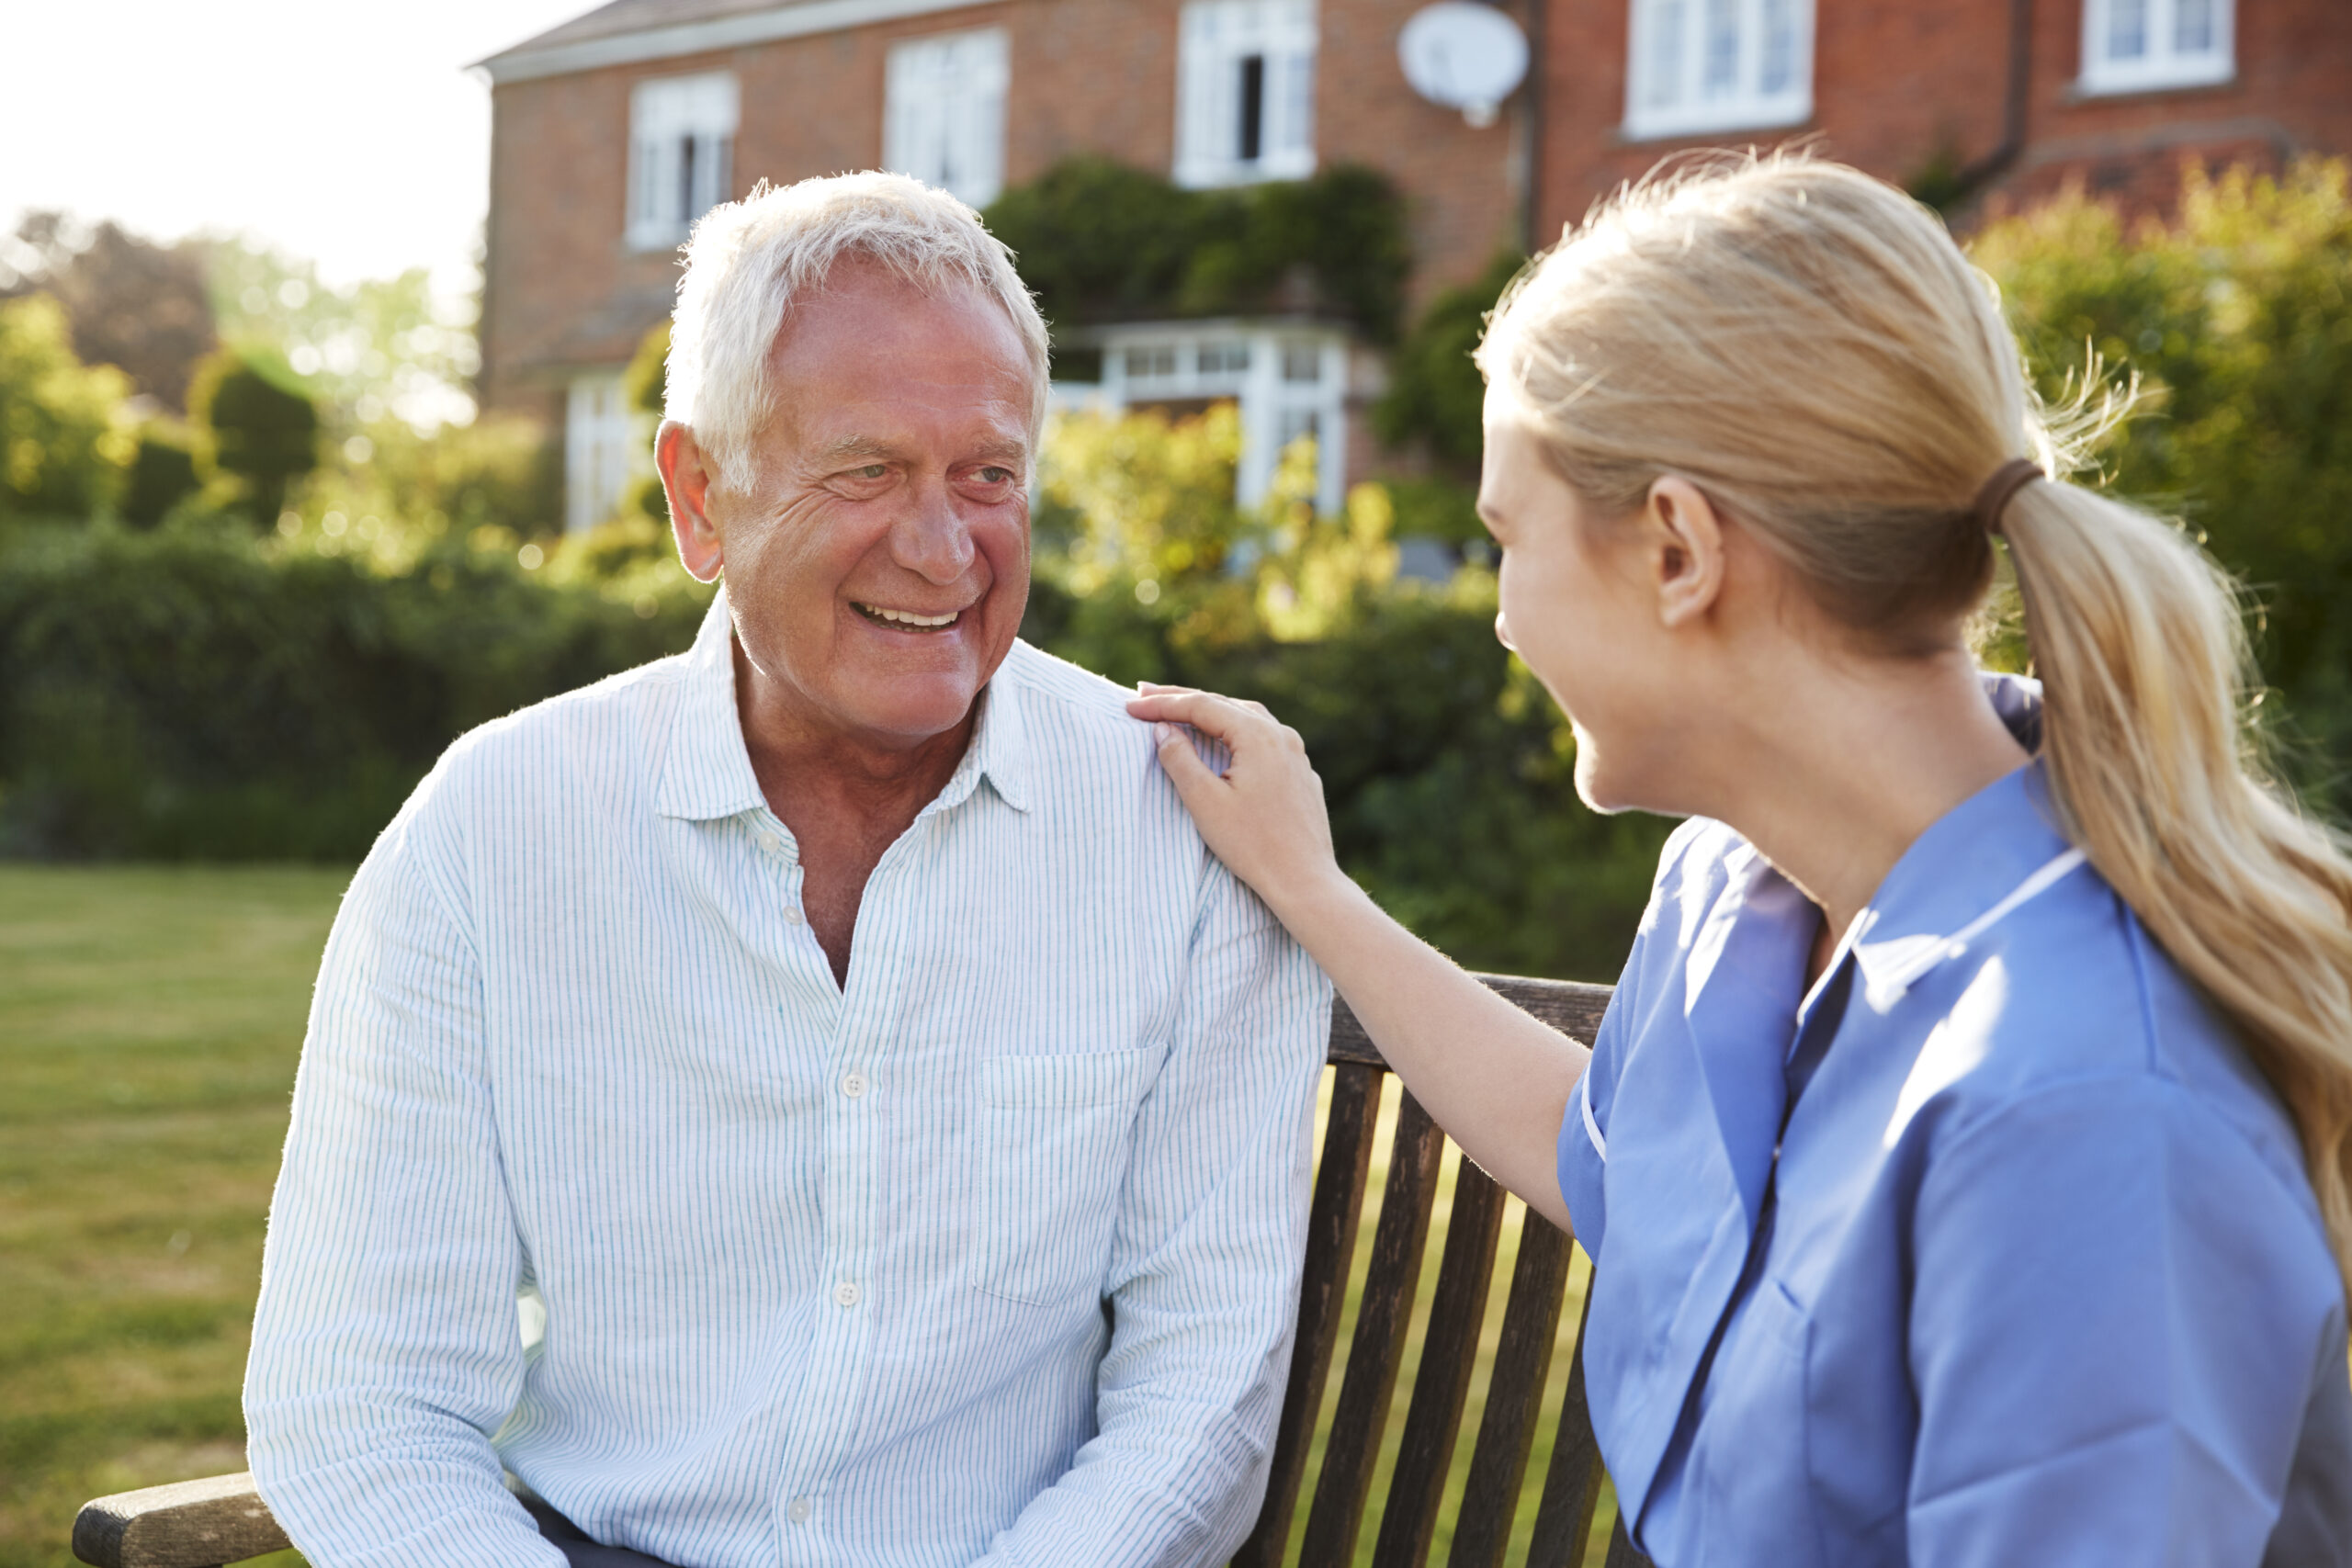 homecare support from care in kent ! care in kent your flexible friend